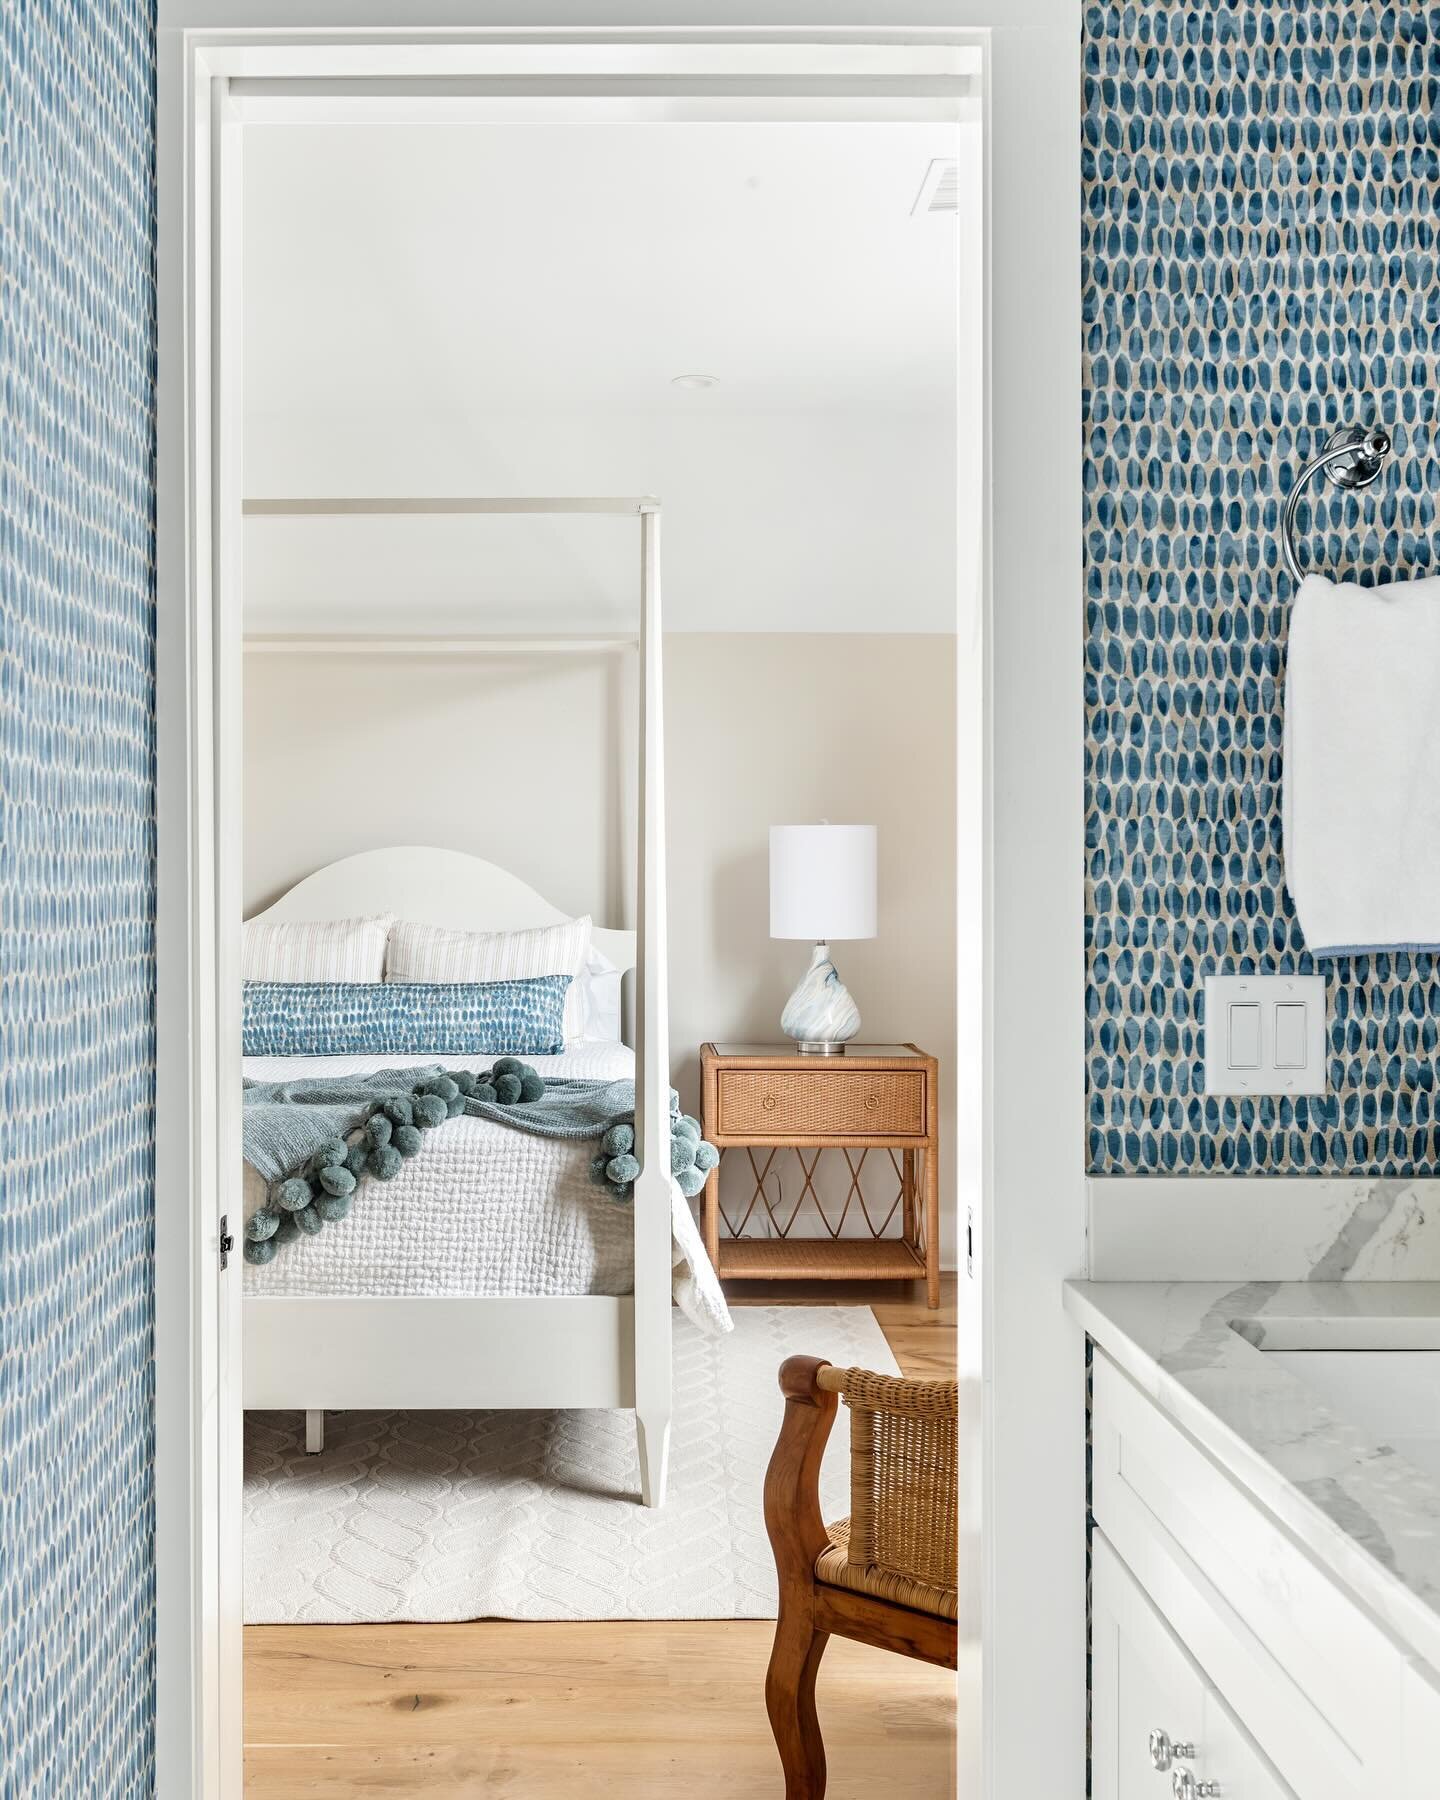 We love creating spaces that surprise and delight! The fun bathroom drama gives way to a calm bedroom retreat. The bold wallpaper is balanced by the serene neutrals in the connecting space. ✨ want your house to tell a story like this? Give us a call!